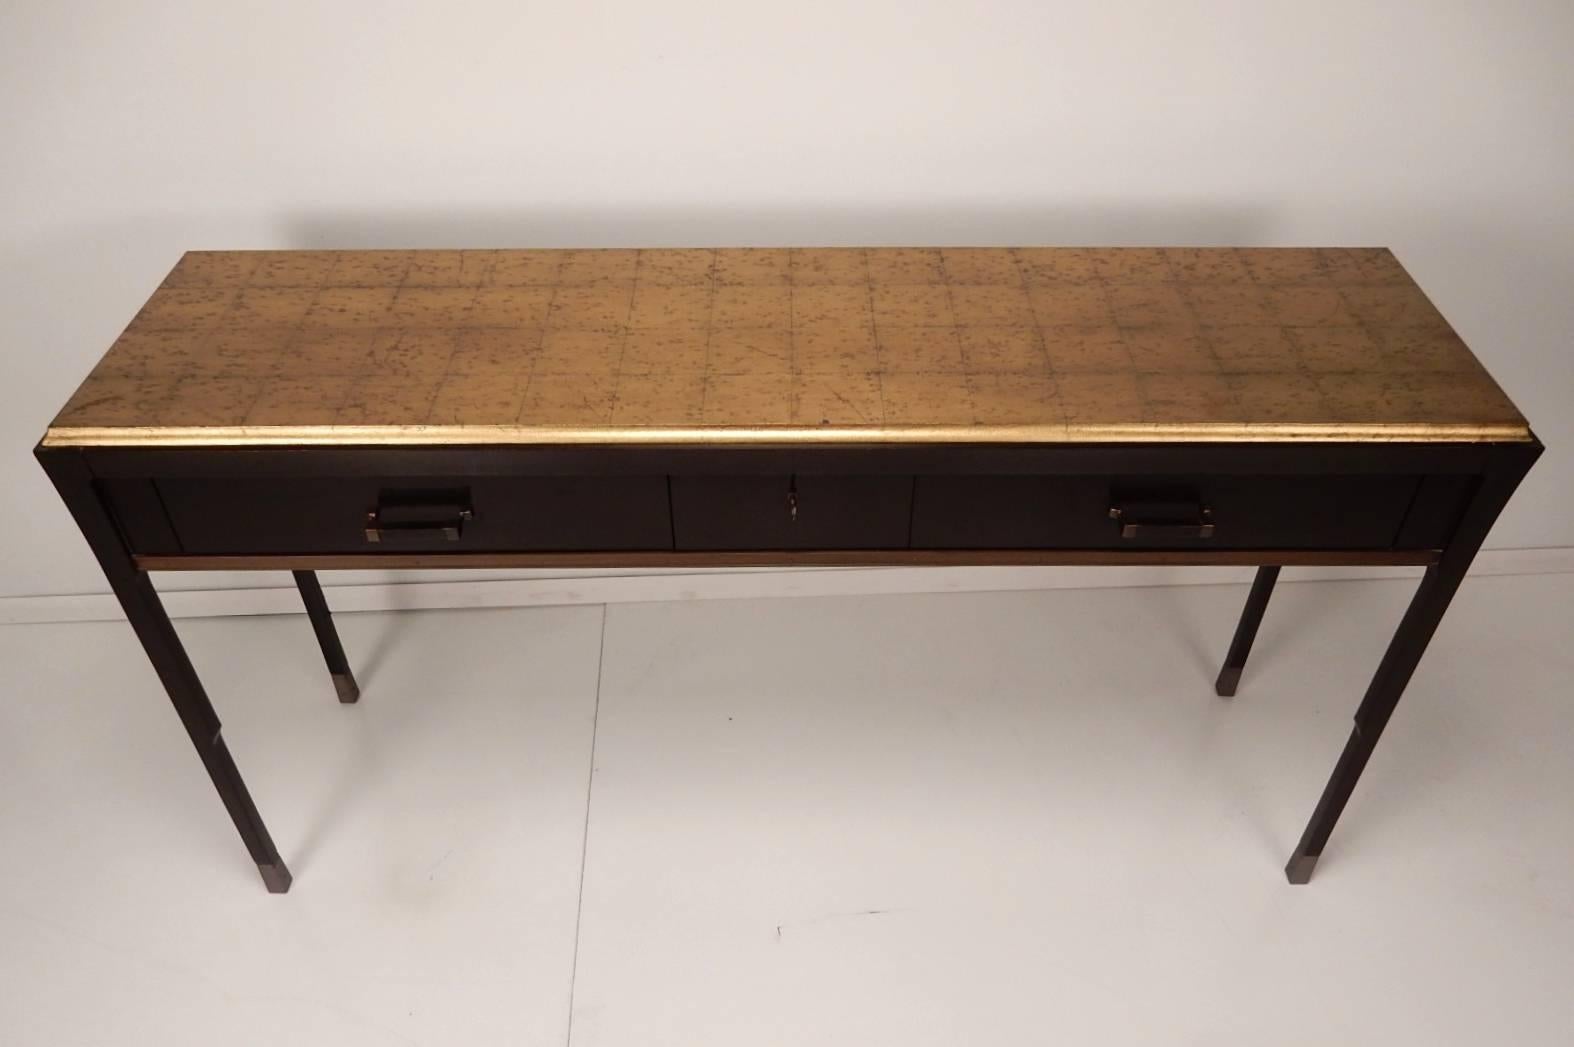 Dramatic rill hall table with gold rice finish top, two large drawers with a third lockable centre drawer (with keys). Four graceful taper legs capped in solid bronze sabots.
Designed by Bill Sofield for Baker Furniture.
Extraordinary well-crafted